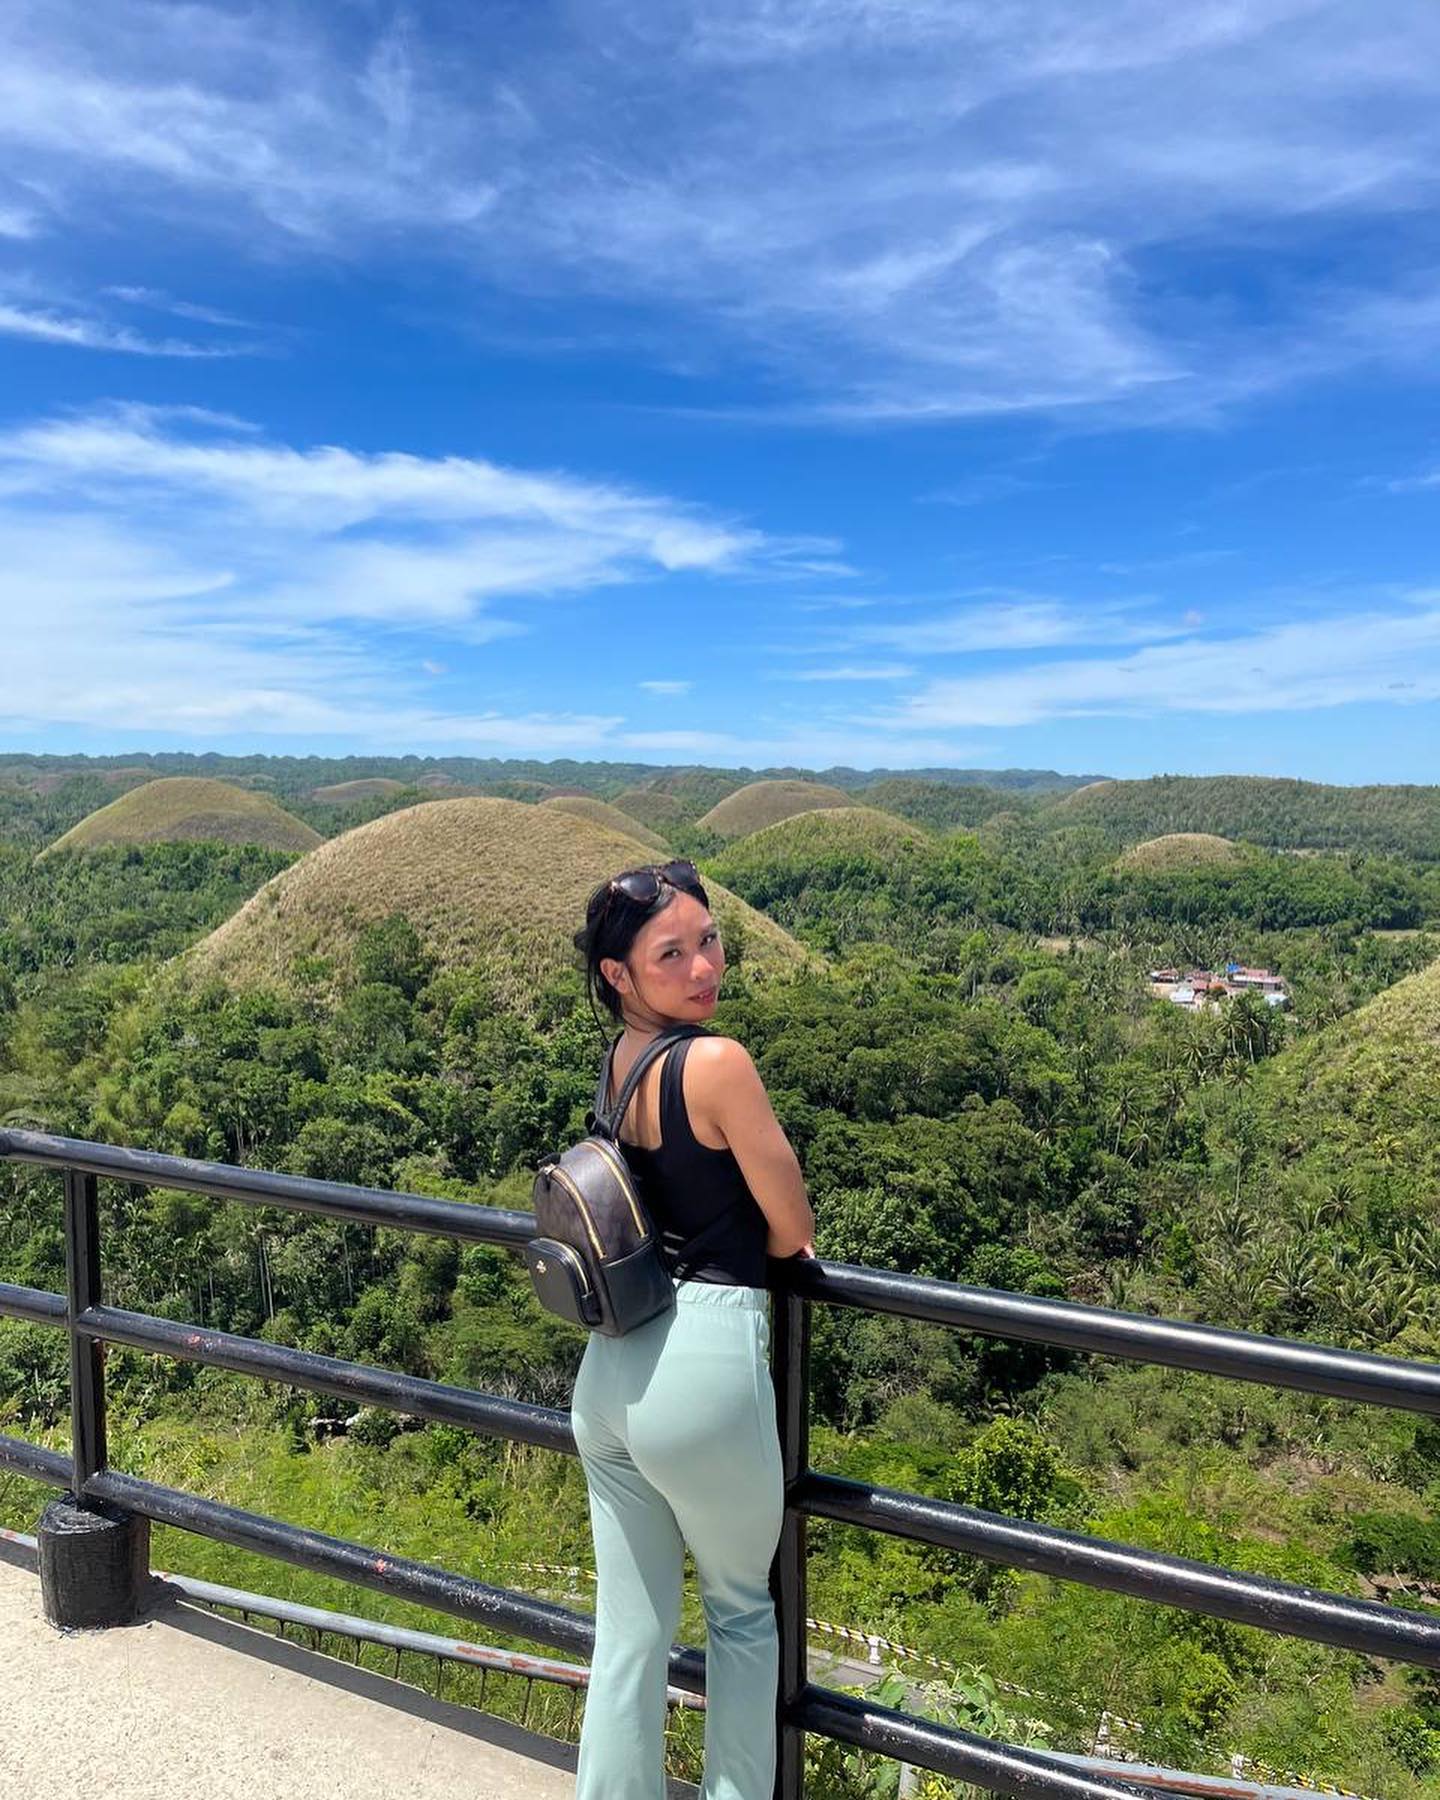 I’m feeling great and happy to be in this place! The view of chocolate hills that melts my eyes and heart ever! ❤️💕 

 Comment down if you want to come over ⬇️ 👀😍
.
.
.
.
.
.
Crafting captivating Instagram content is an artistic fusion of fashion photography nature current styles navigate through life seizing moments beauty inspiration Immerse yourself fitness music beachy vibes forging connections through fashion art infectious allure of trending reels serves as a catalyst fueling your inspiring creative journey Embrace fitness, music, and beach vibes while connecting through fashion, art, and the contagious allure of trending reels, inspiring your creative journey.

#ootd #Fashion #nature #trendyreels #trend #Youthful #WellBeing #selflove #Fashion #art #connection #outdoor #yoga #wellness #asian #Photography #Fashion #ReelTrendsetter #Creative #LifeThroughLens #fyp